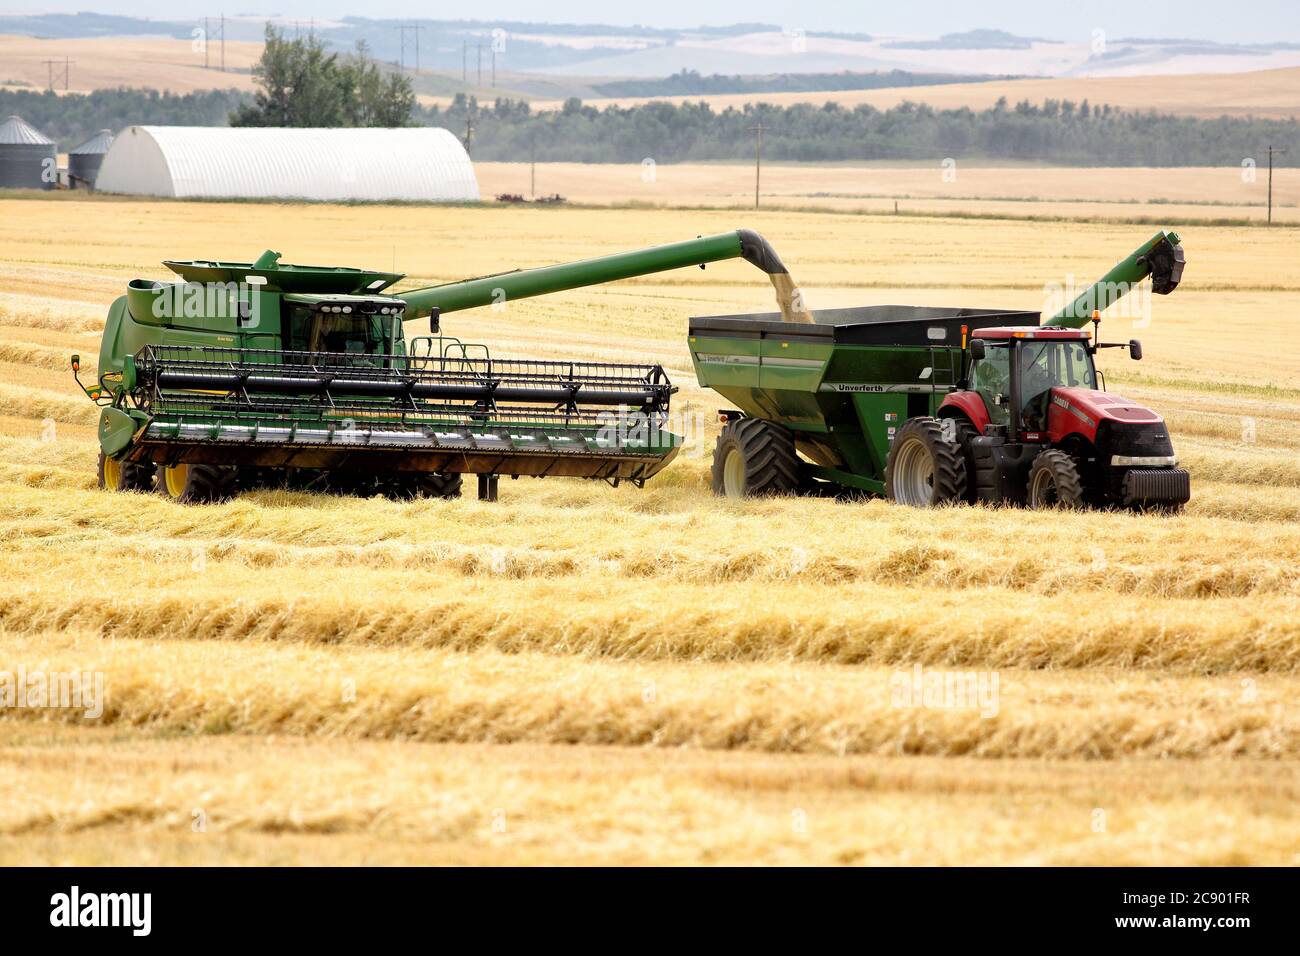 Farm machinery offloading harvested wheat from a combine to a bulk grain cart in the fertile farm fields of Idaho. Stock Photo